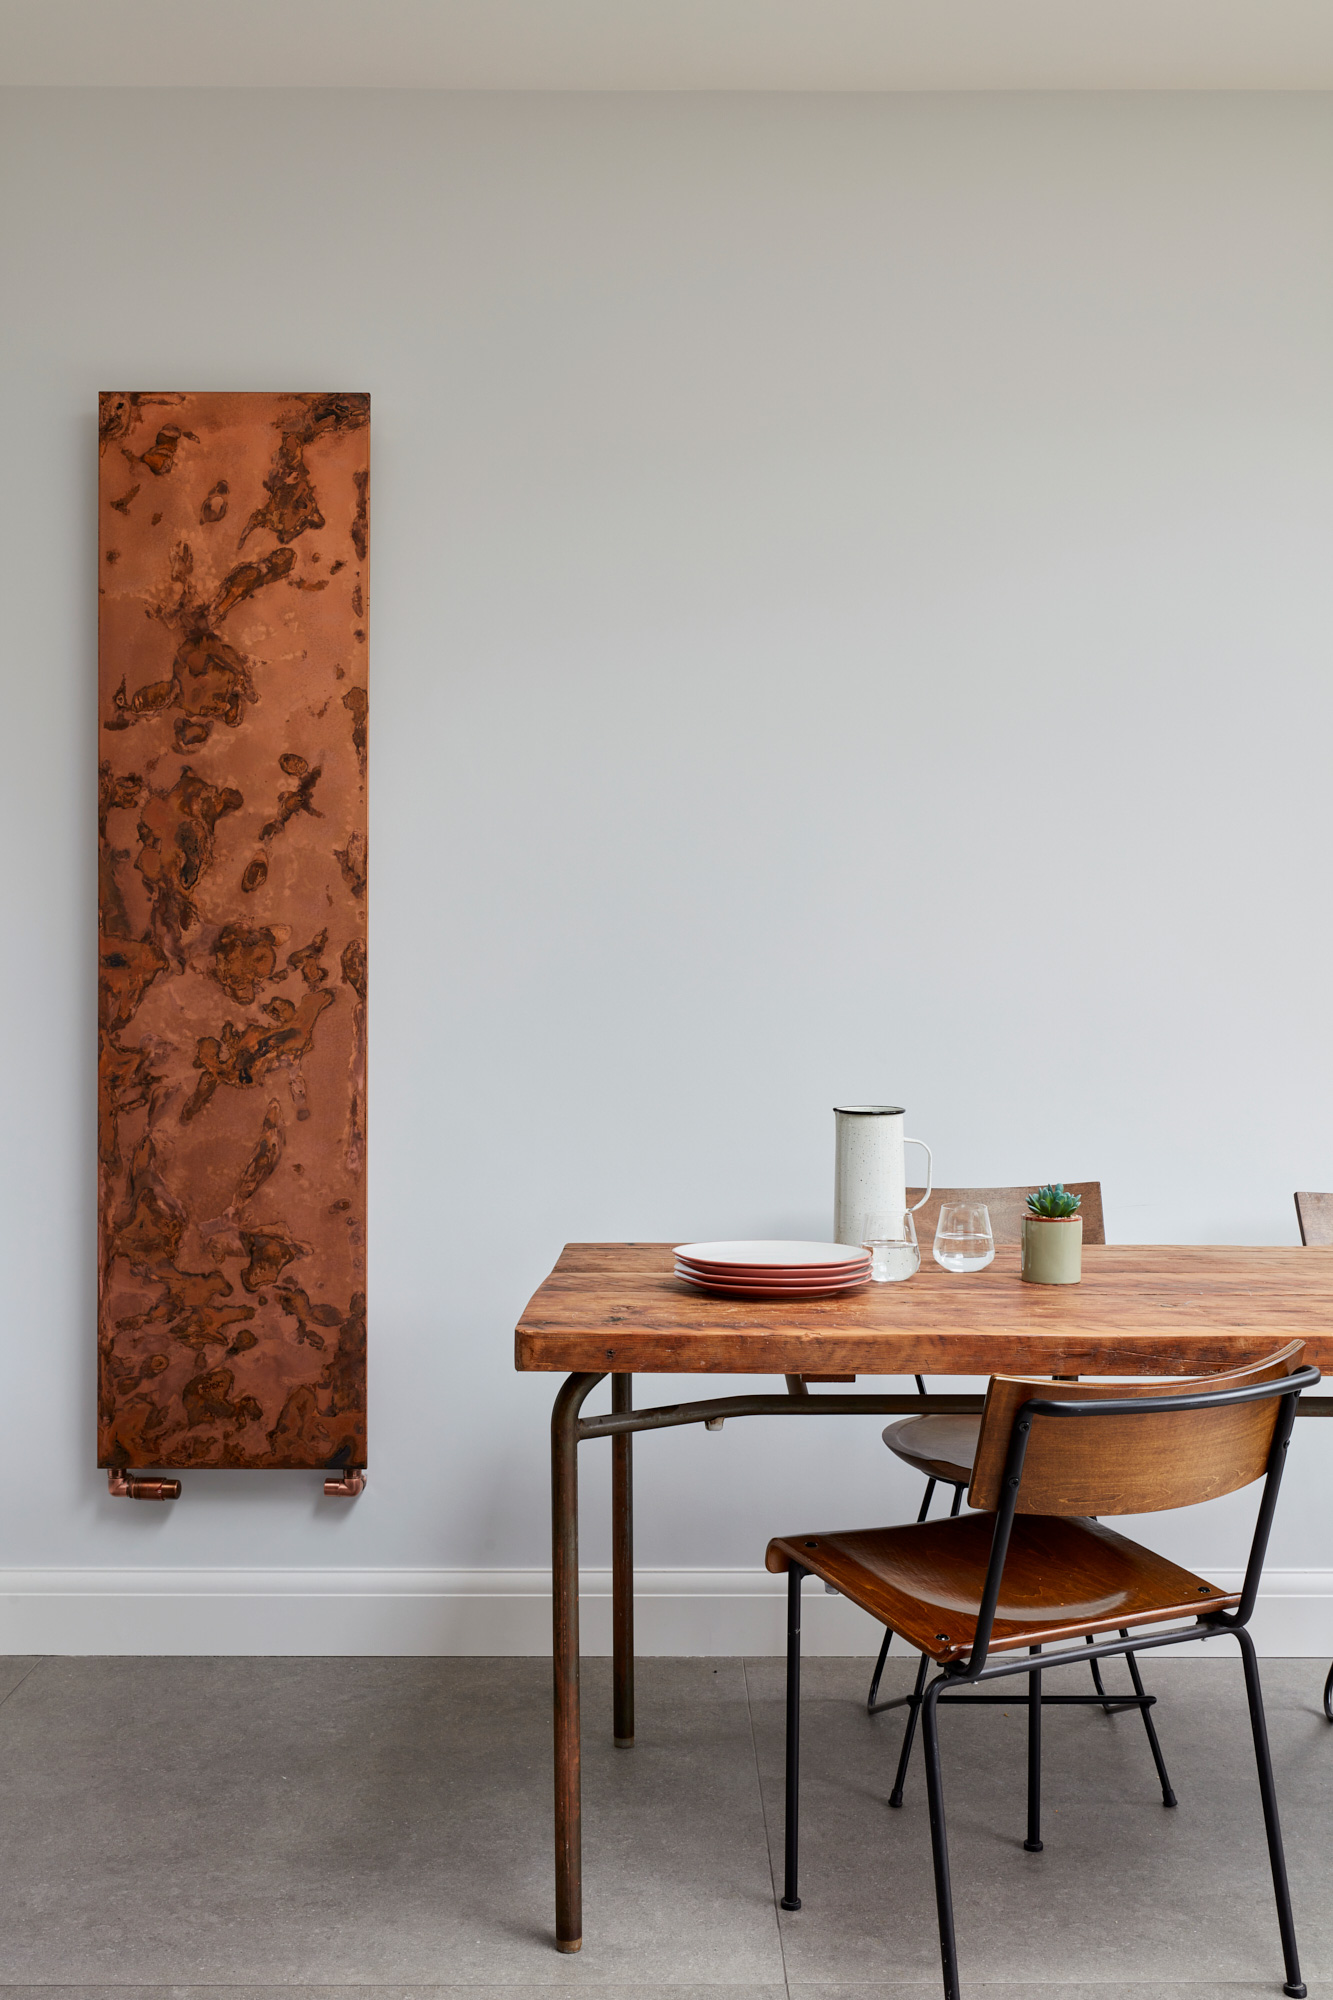 Exposed copper radiator with reclaimed oak table